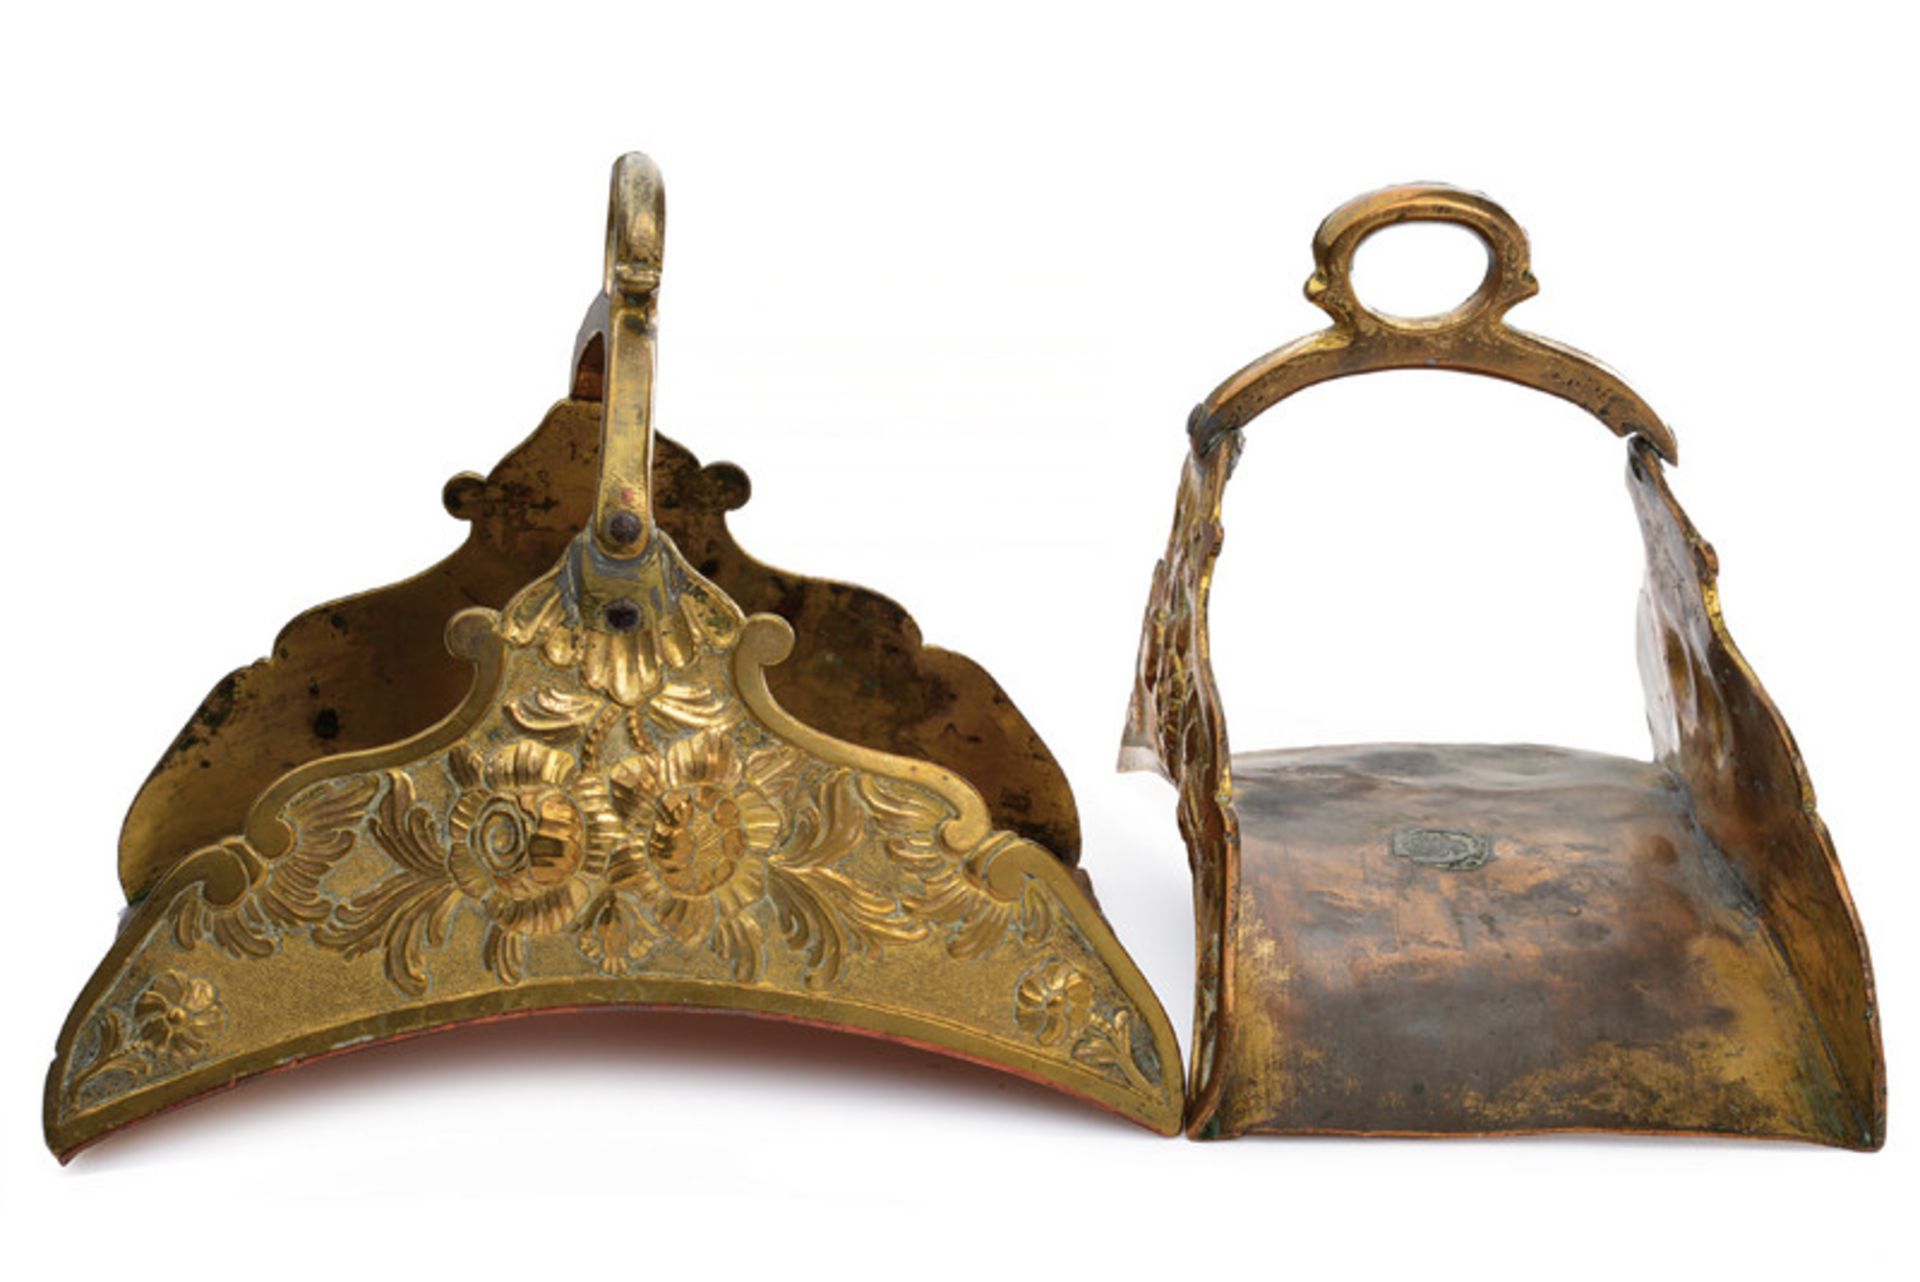 A fine and rare pair of Mameluke stirrups , dating: late 17th Century, provenance: Ottoman Empire, - Image 2 of 2